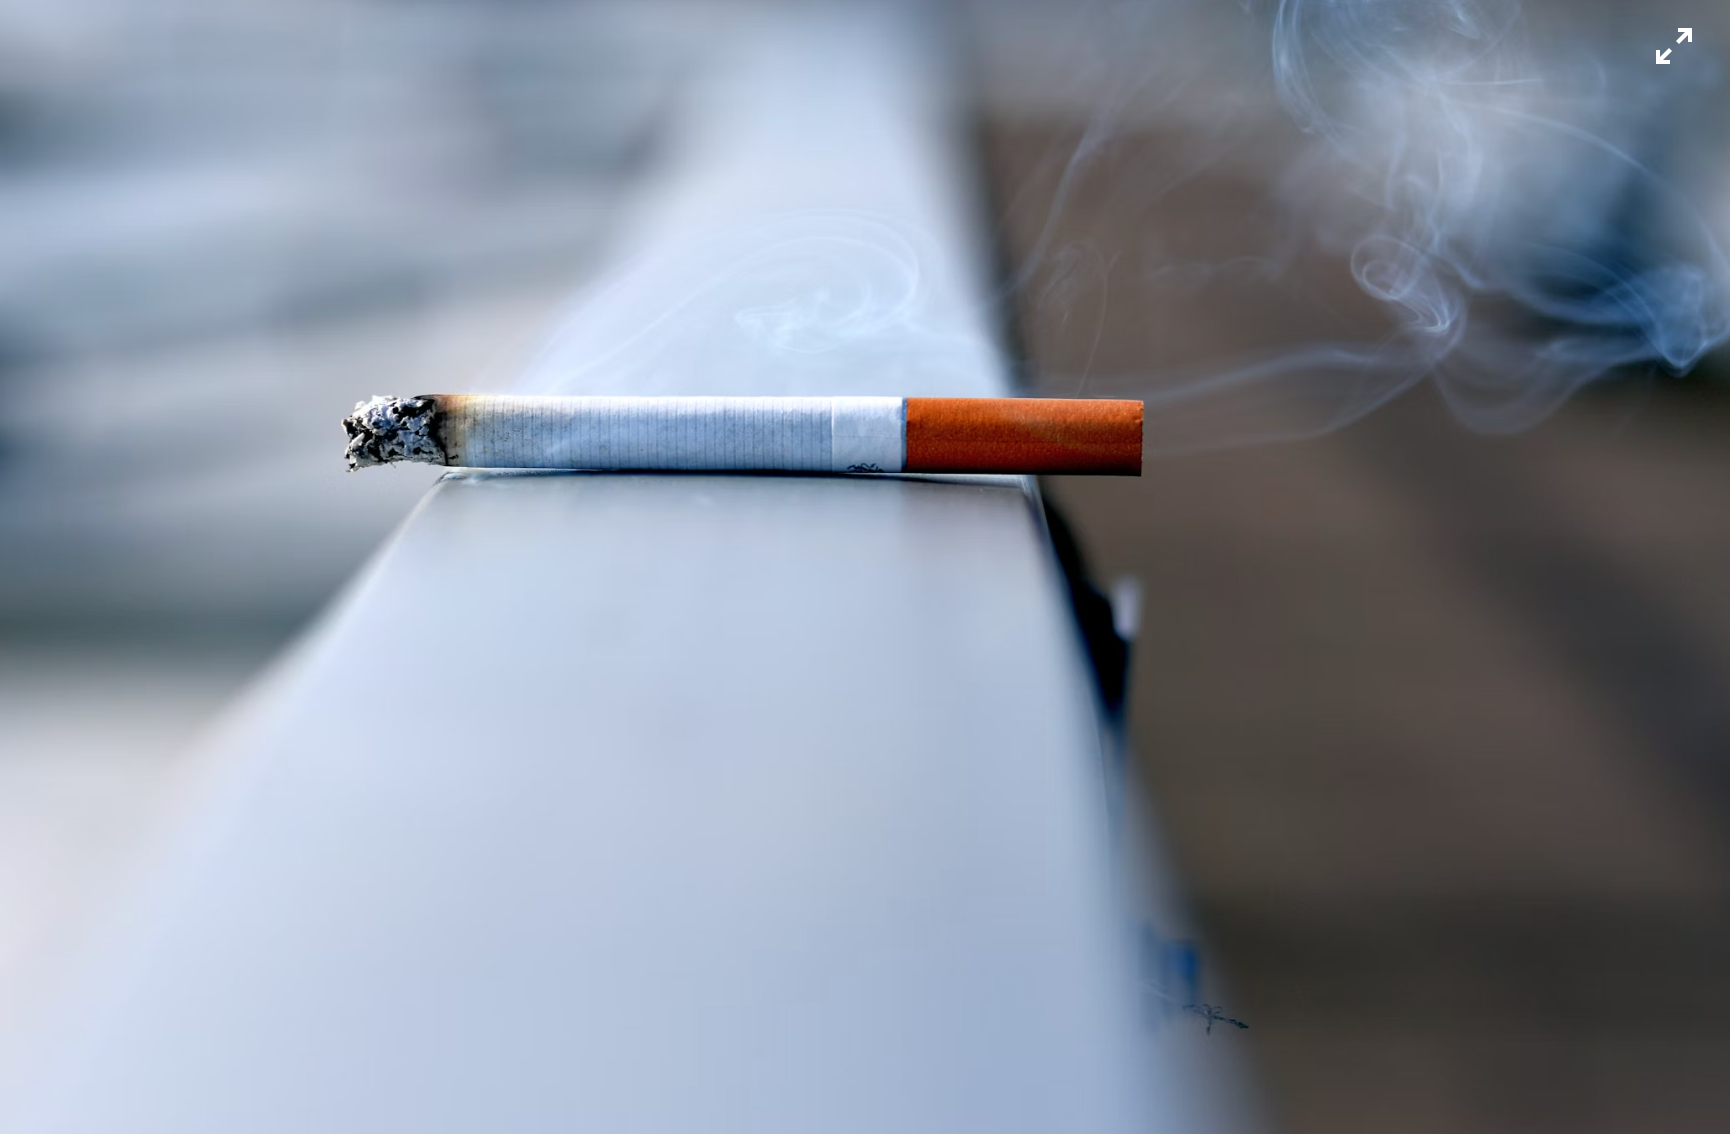 Low Exposure to Secondhand Smoke Is Linked to a Rheumatoid Arthritis Risk